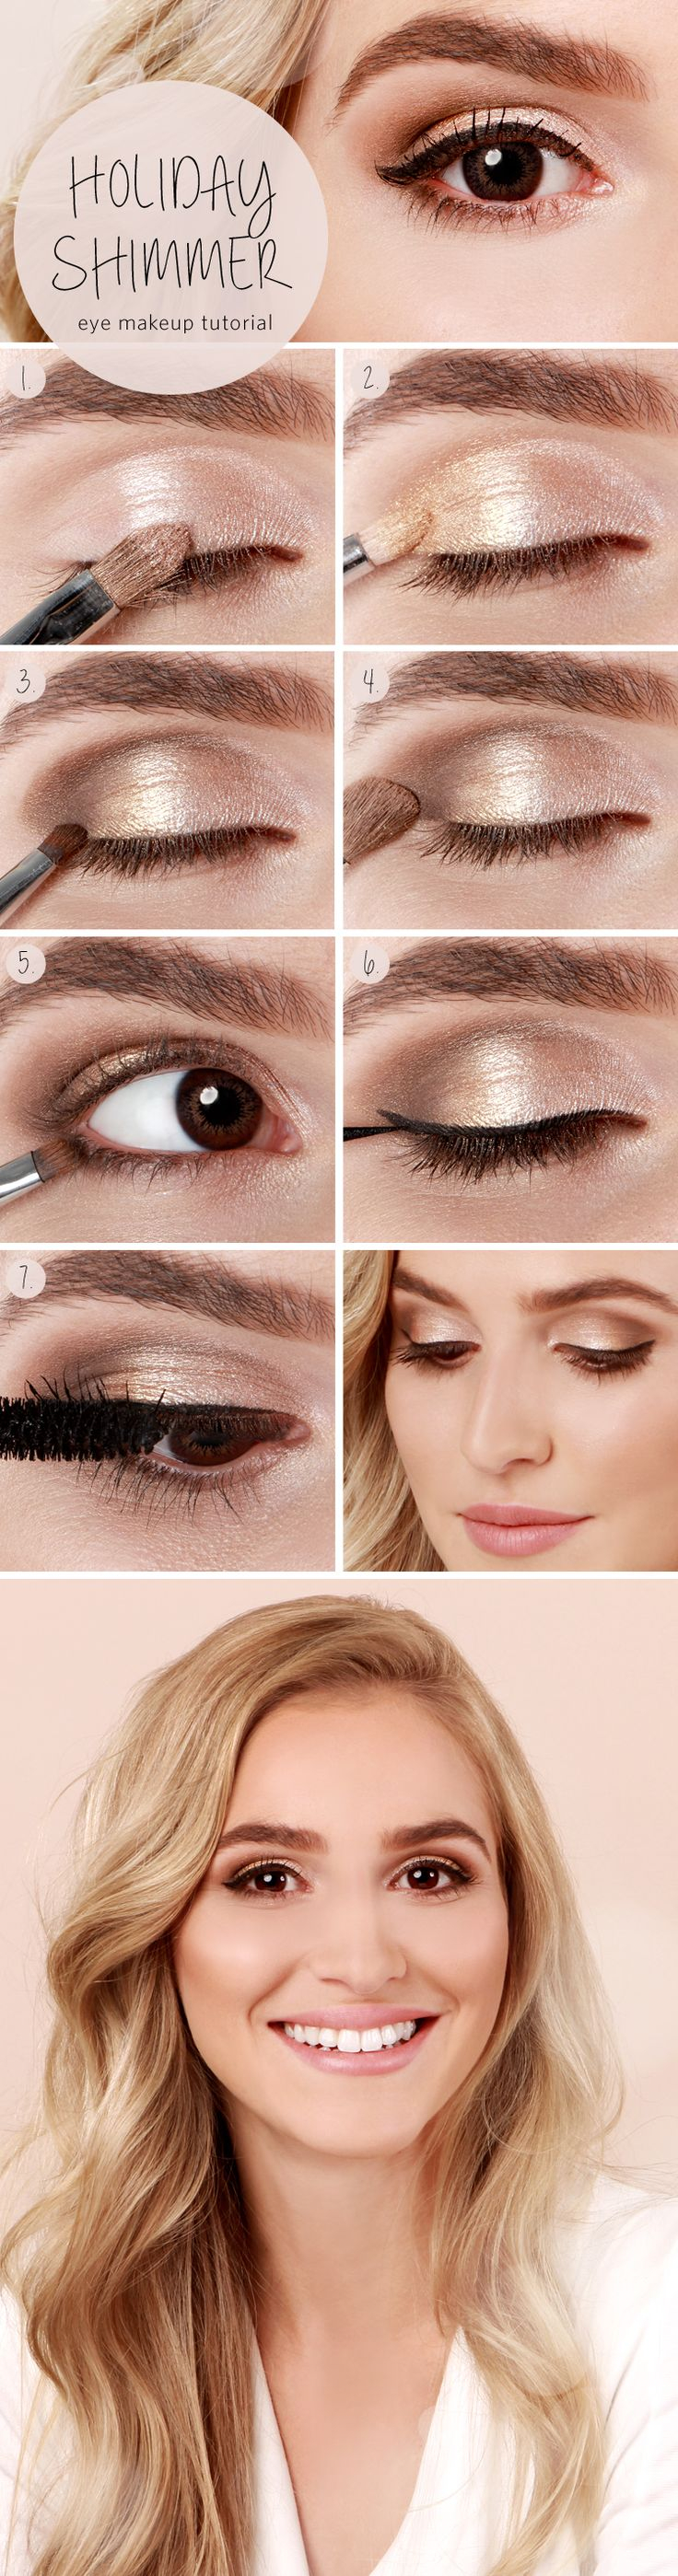 Easy Evening Eye Makeup 27 Pretty Makeup Tutorials For Brown Eyes Styles Weekly